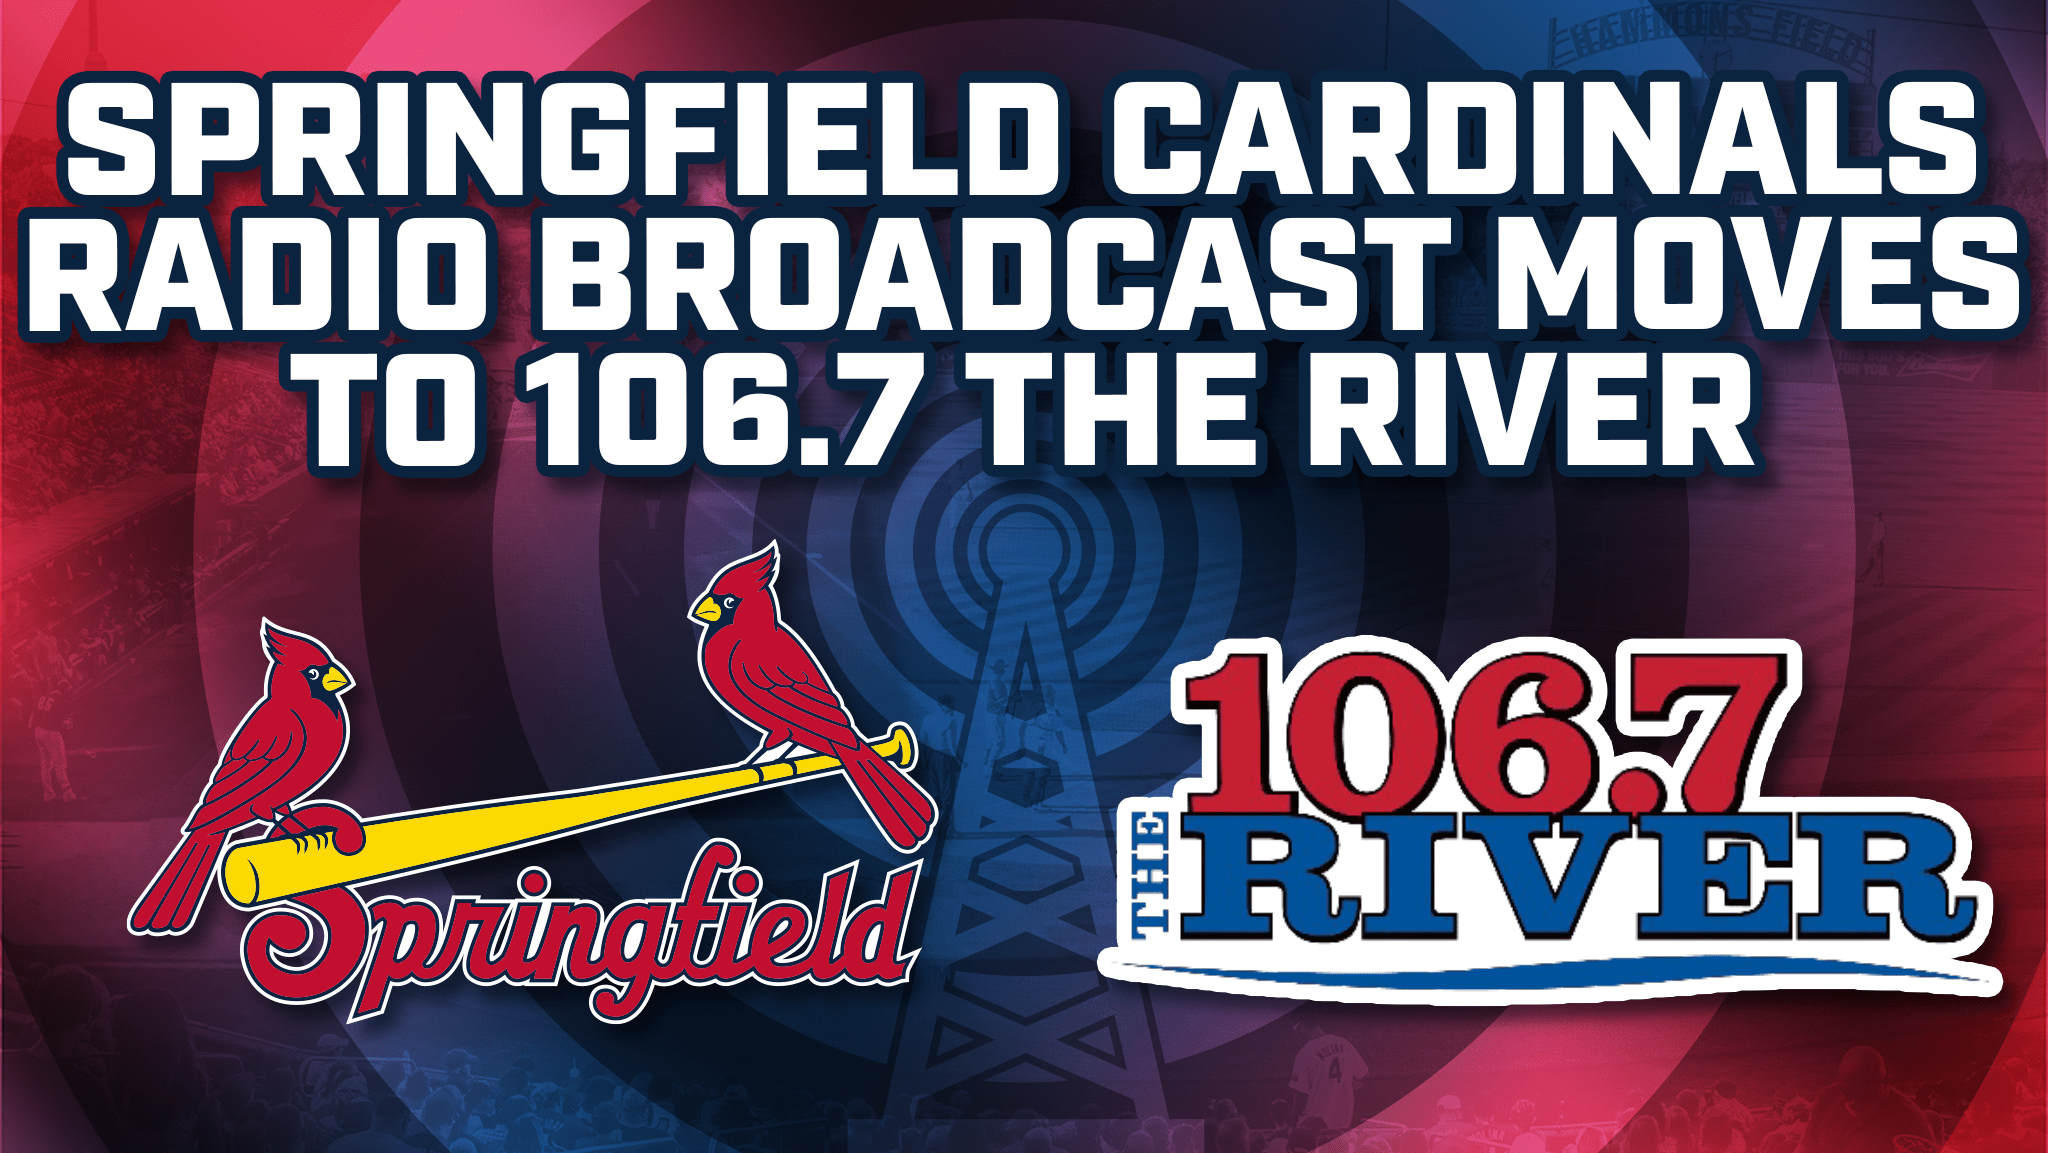 The Springfield Cardinals on 106.7 The River 106.7 The River